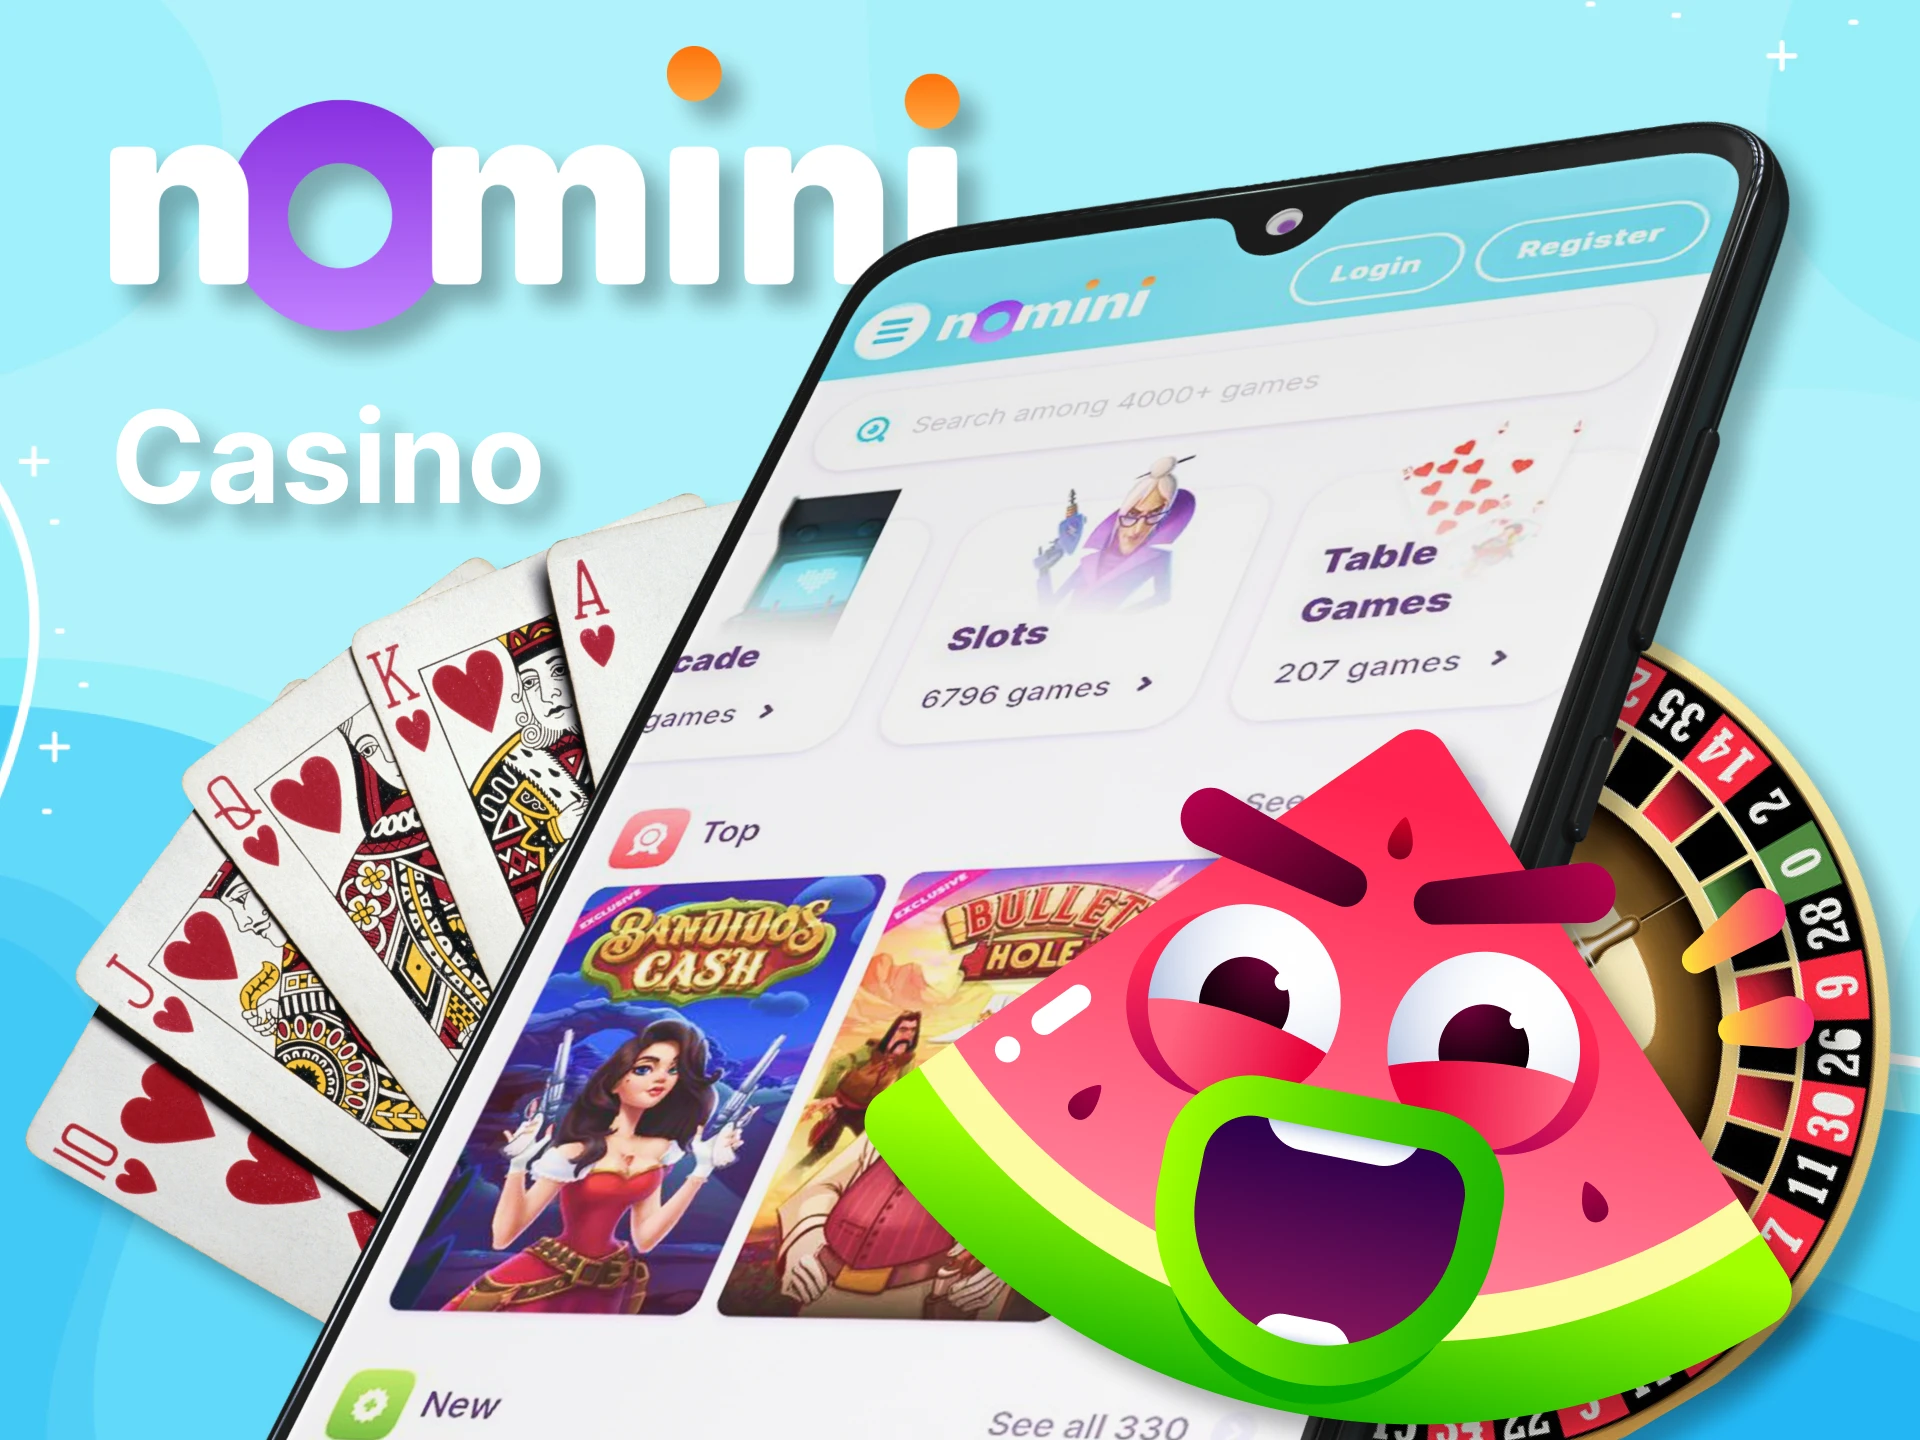 Be sure to visit the casino section of the Nomini app to play.